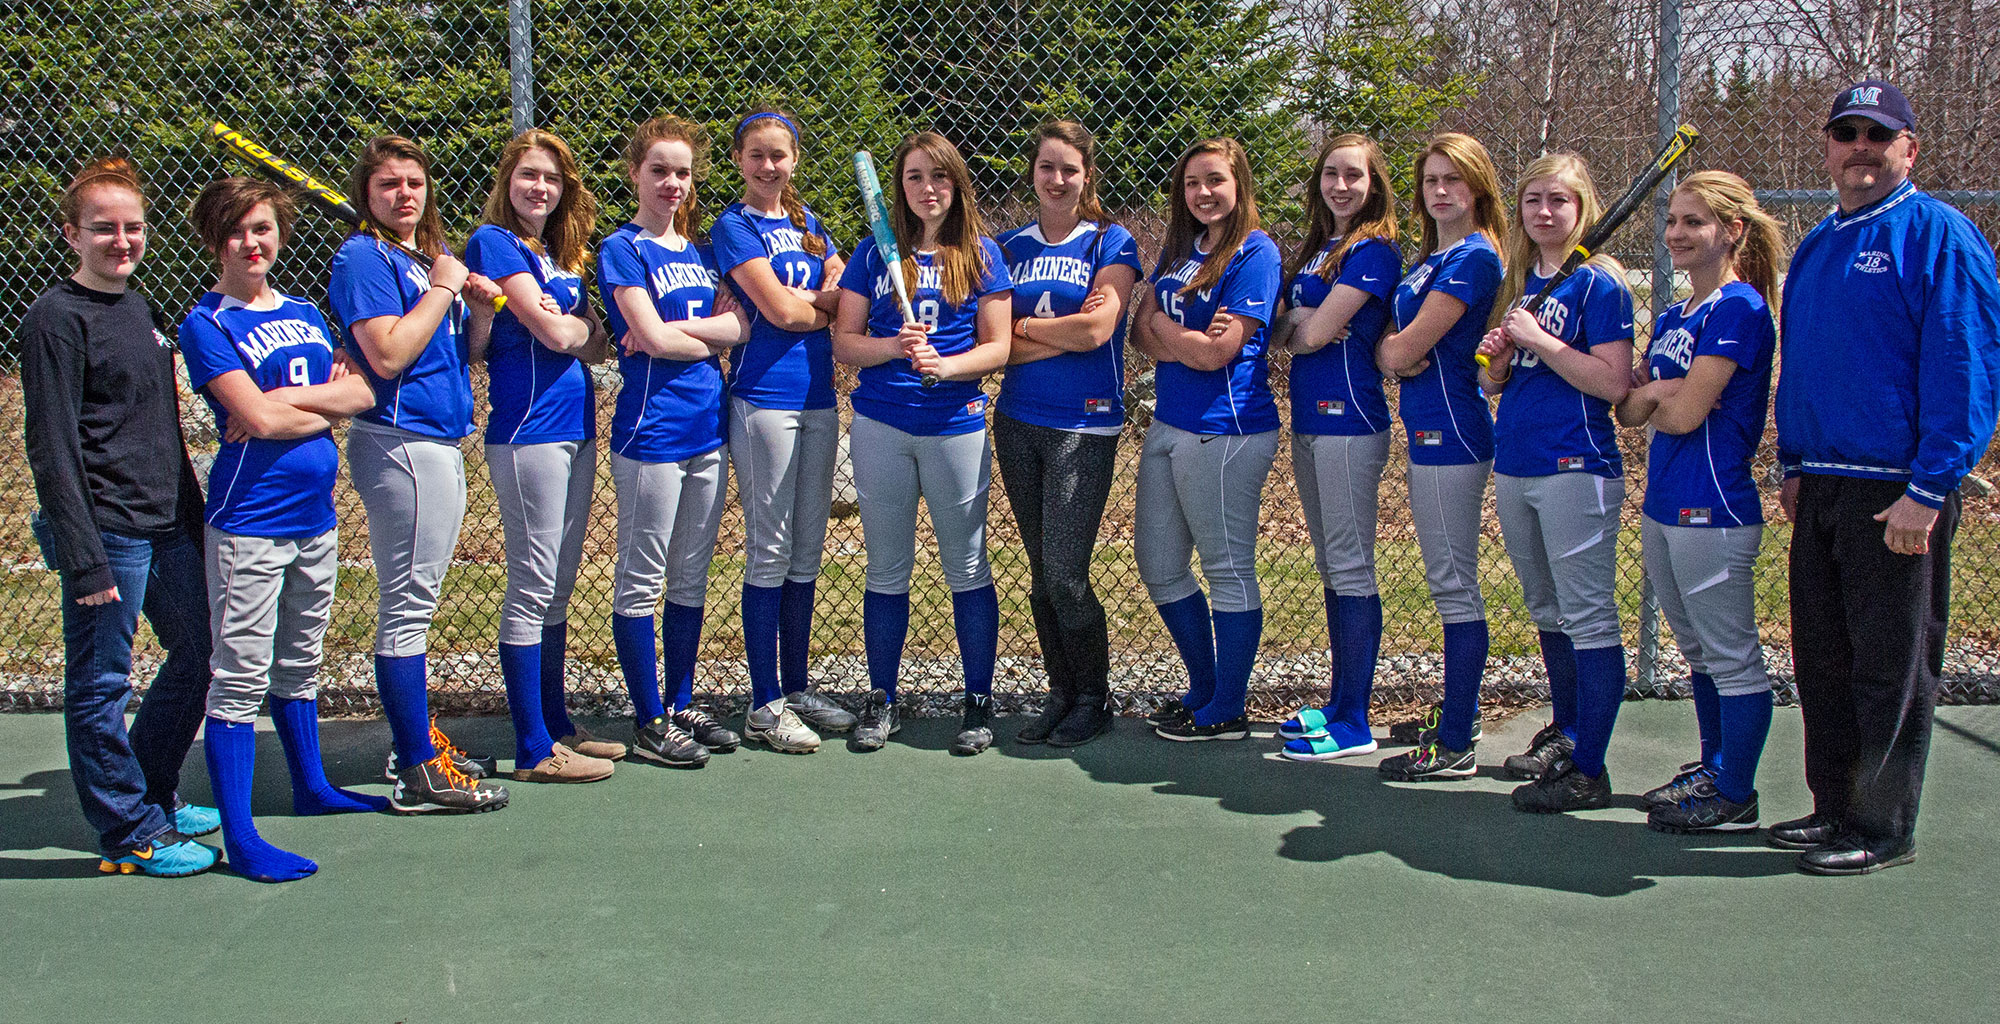 mariner-softball-a-small-team-with-much-experience-penobscot-bay